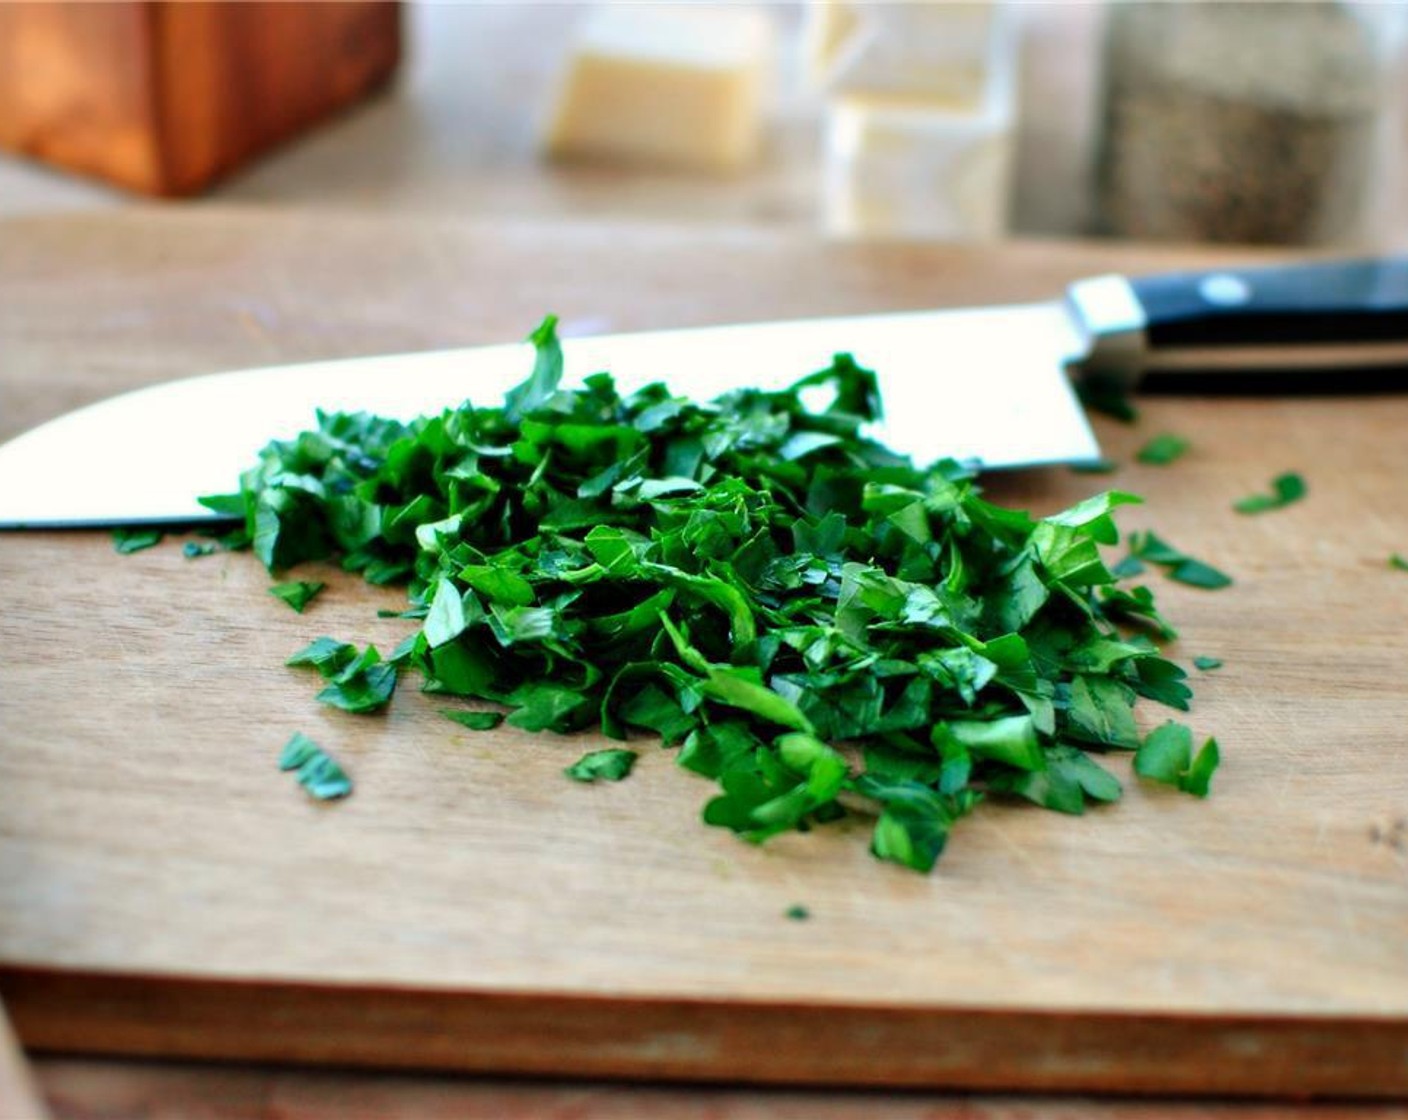 step 1 Chop the Fresh Parsley (10 sprigs) and crush the Garlic (2 cloves) . Chop the Chicken (8 oz) into manageable pieces.